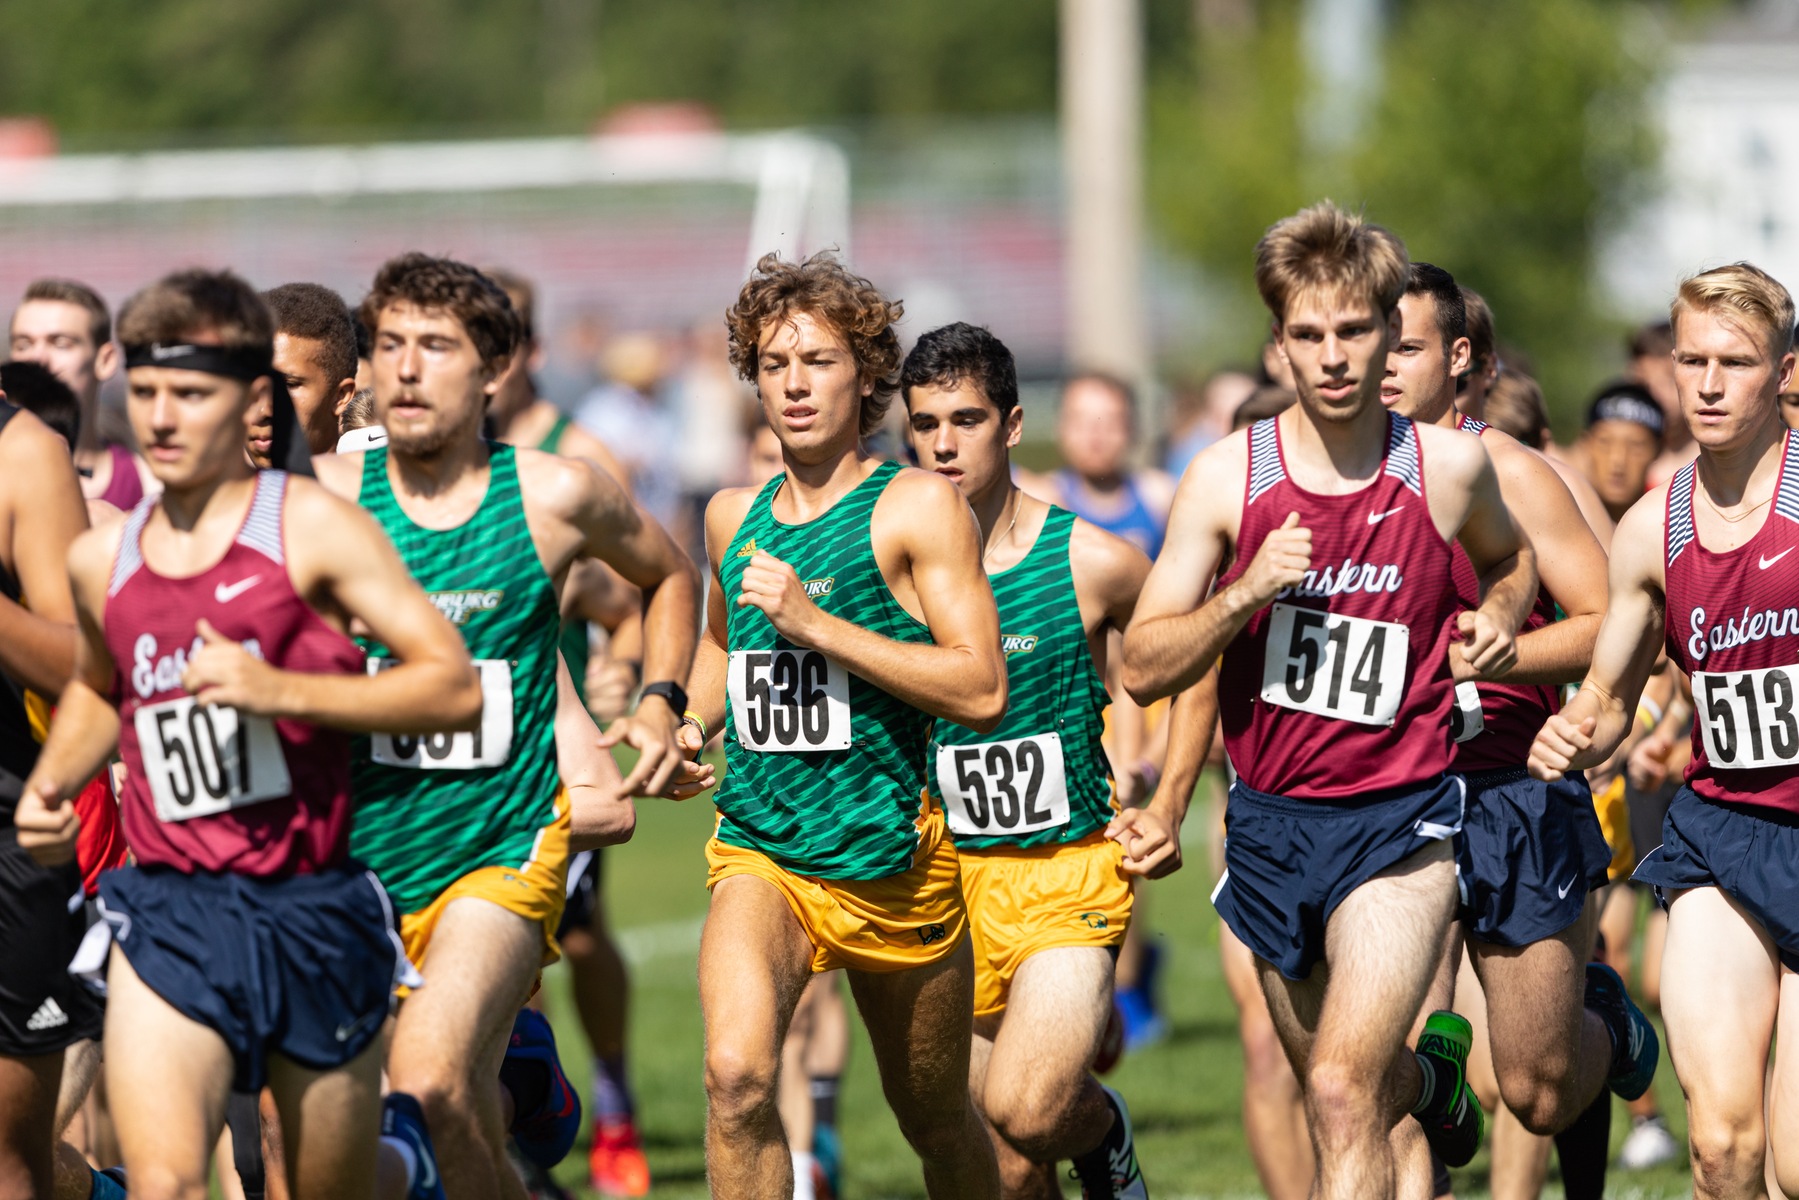 Falcons Race at Purple Valley Invite